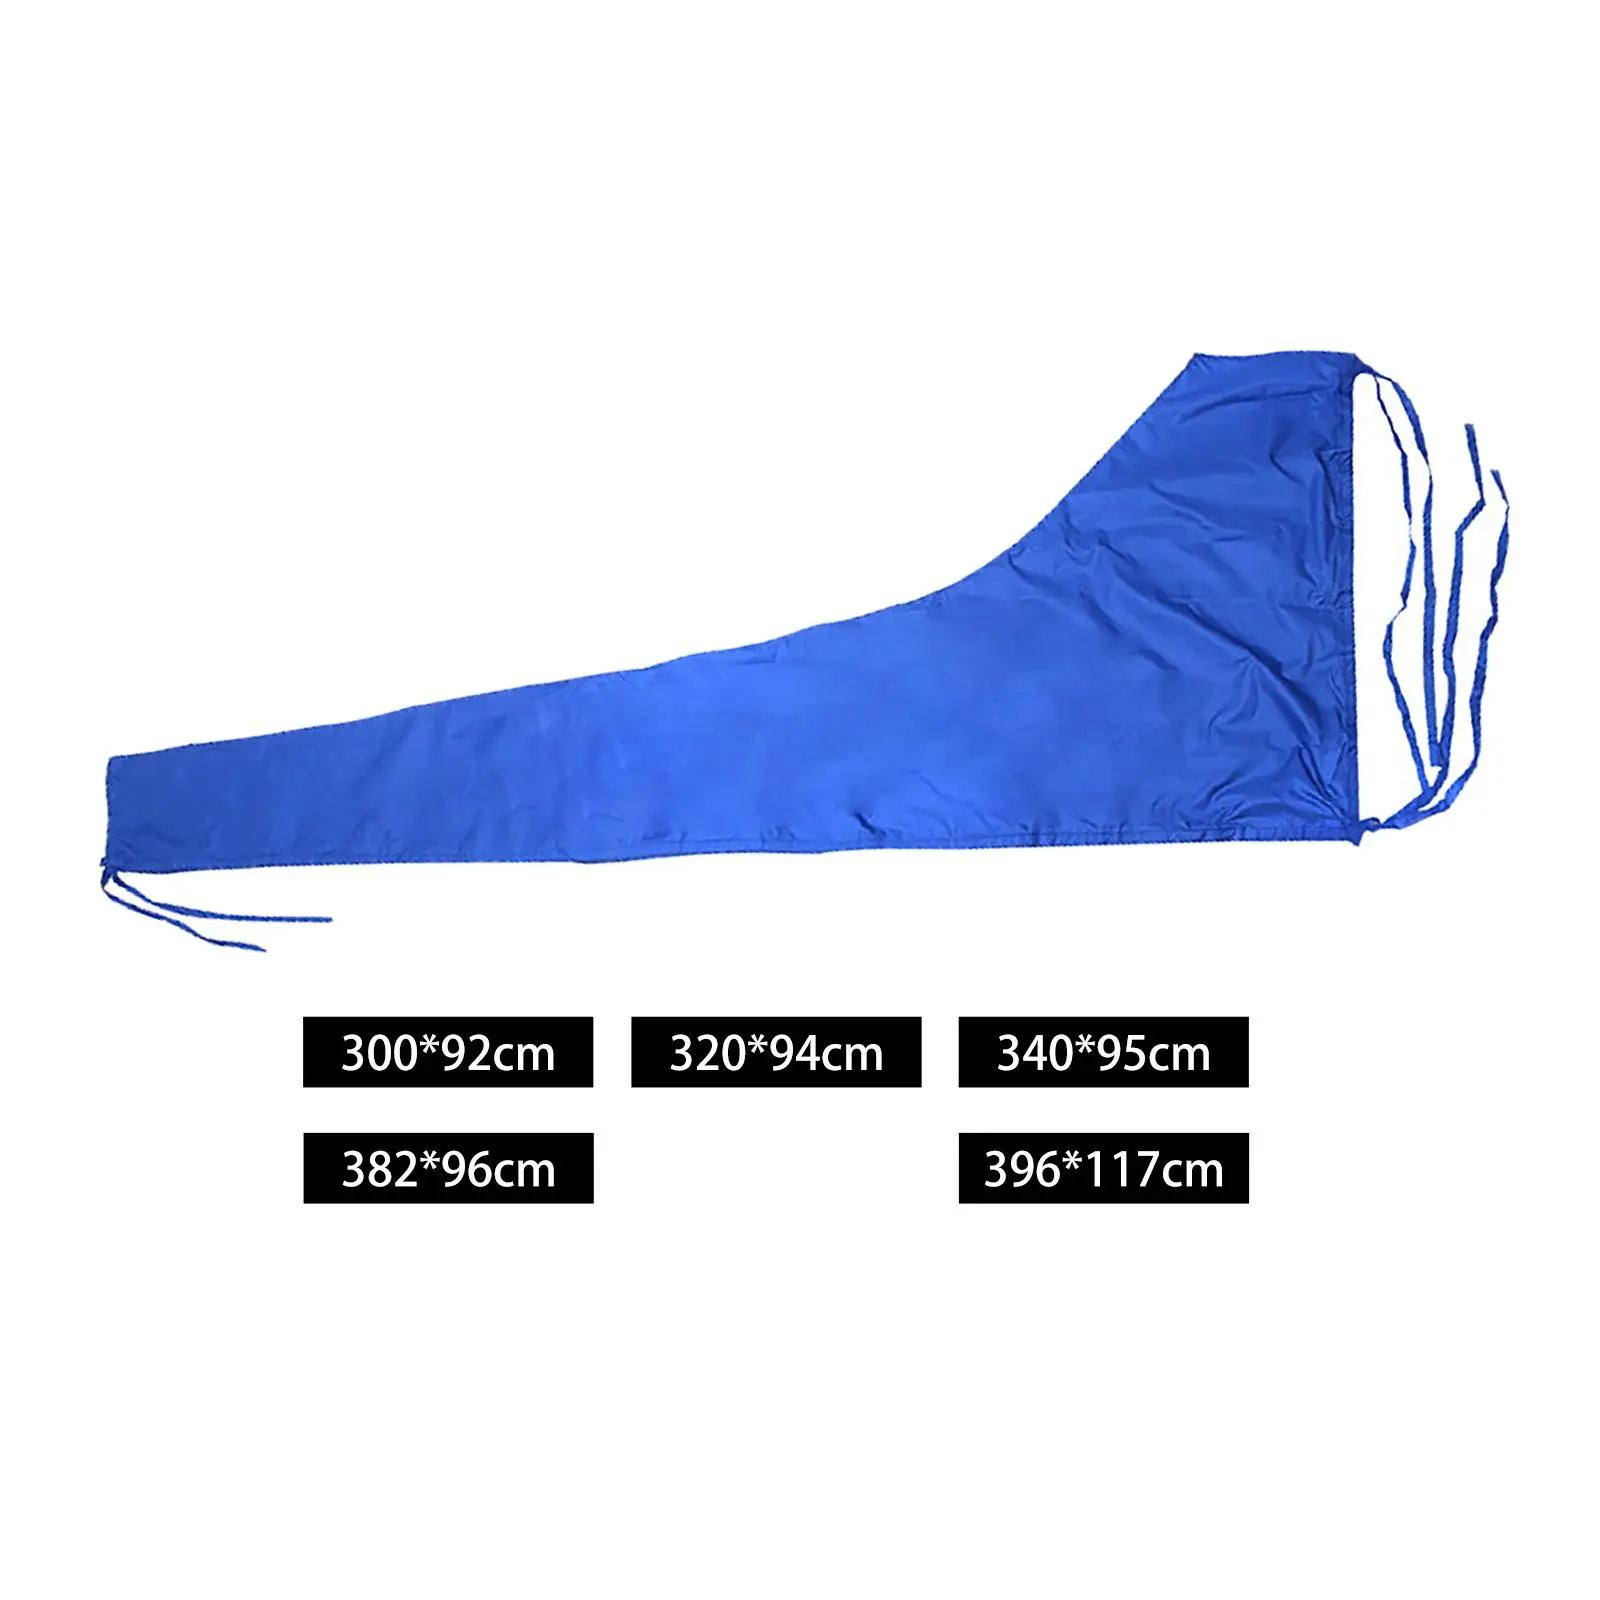 Waterproof Mainsail Boom Cover Dustproof Cover Sail Cover Snow Cover Boat Accessories for All Seasons Seamless Protection Blue